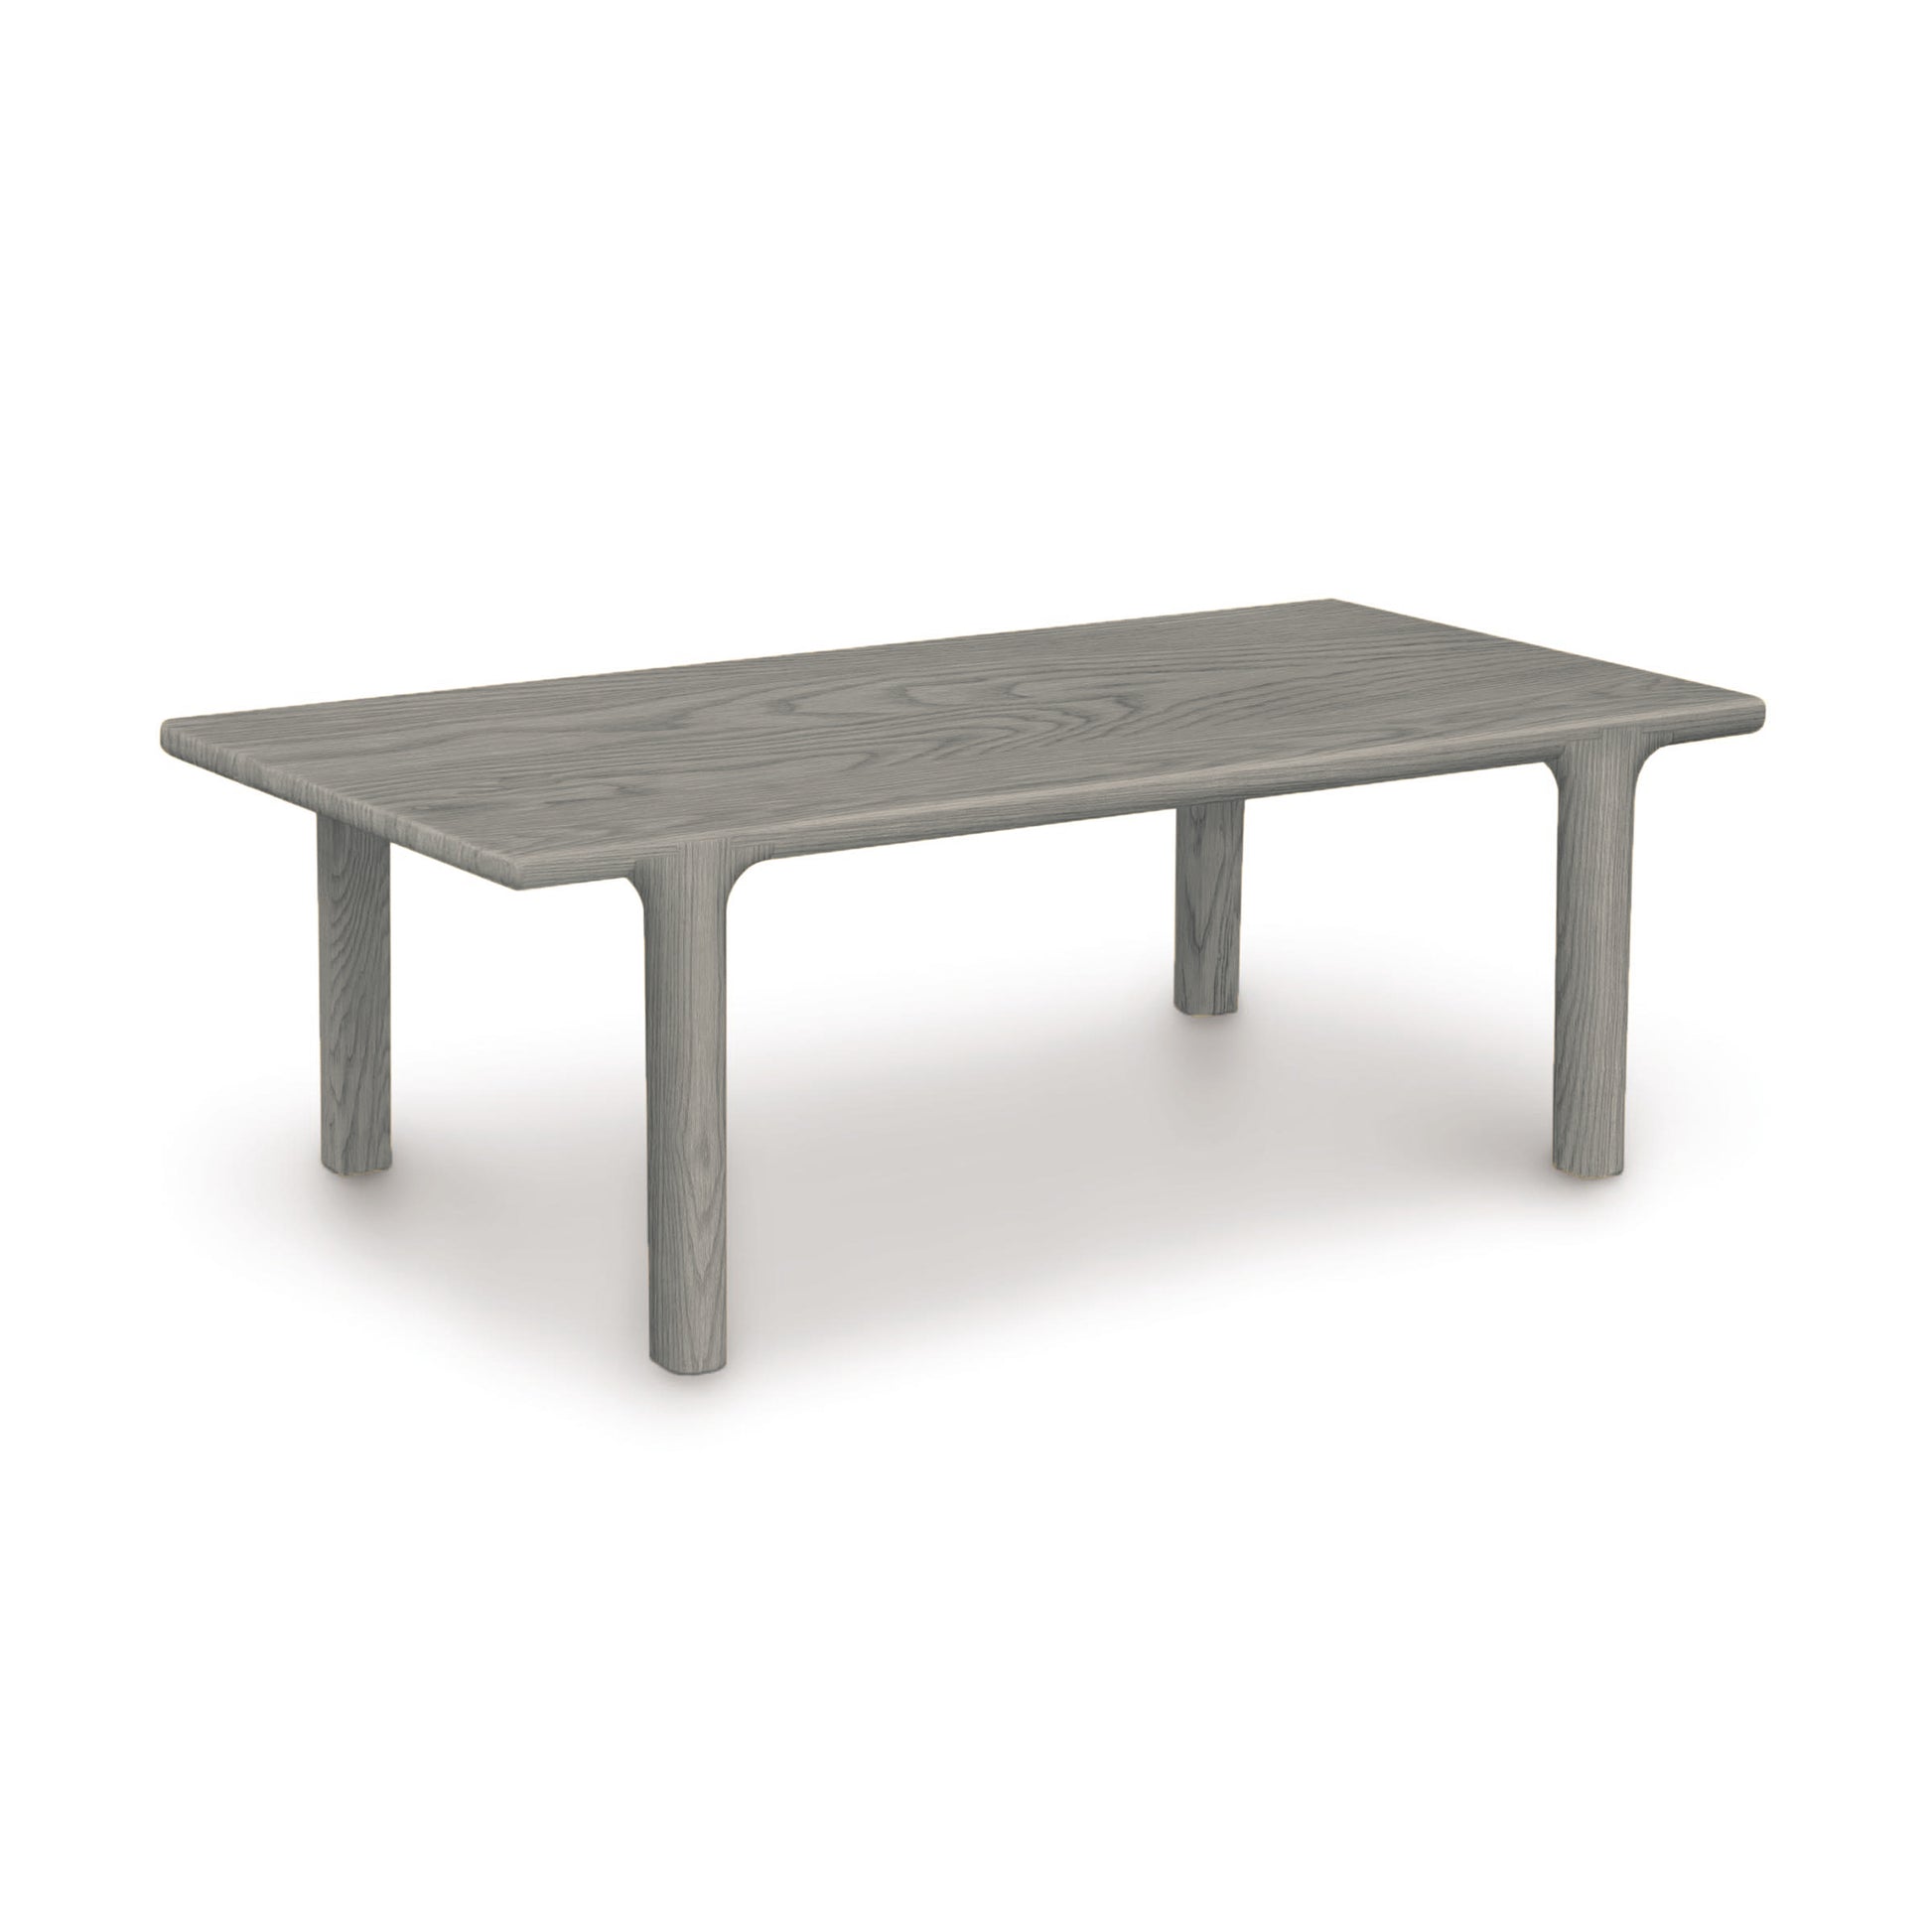 A contemporary design grey wooden table with two legs on a white background featuring the Copeland Furniture Sierra Rectangular Coffee Table.